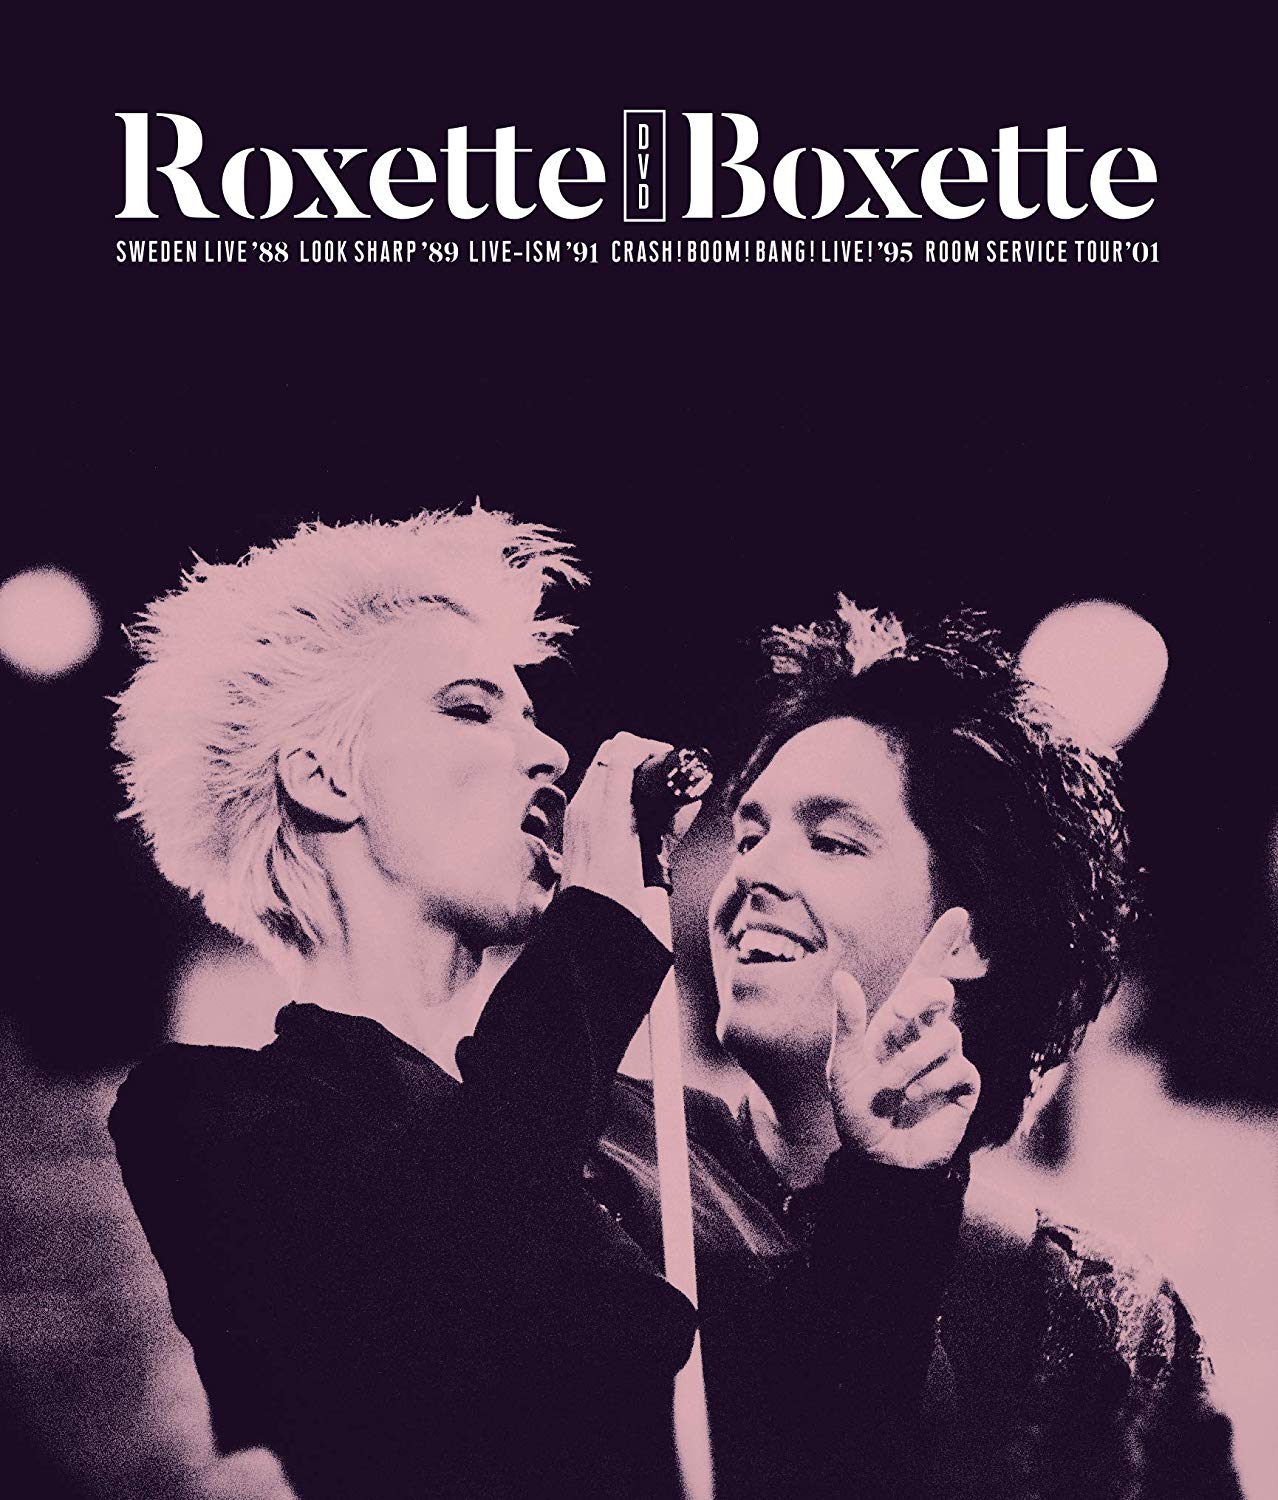 Roxette bang bang. Roxette. Roxette look Sharp. Roxette Live. Караоке Roxette.